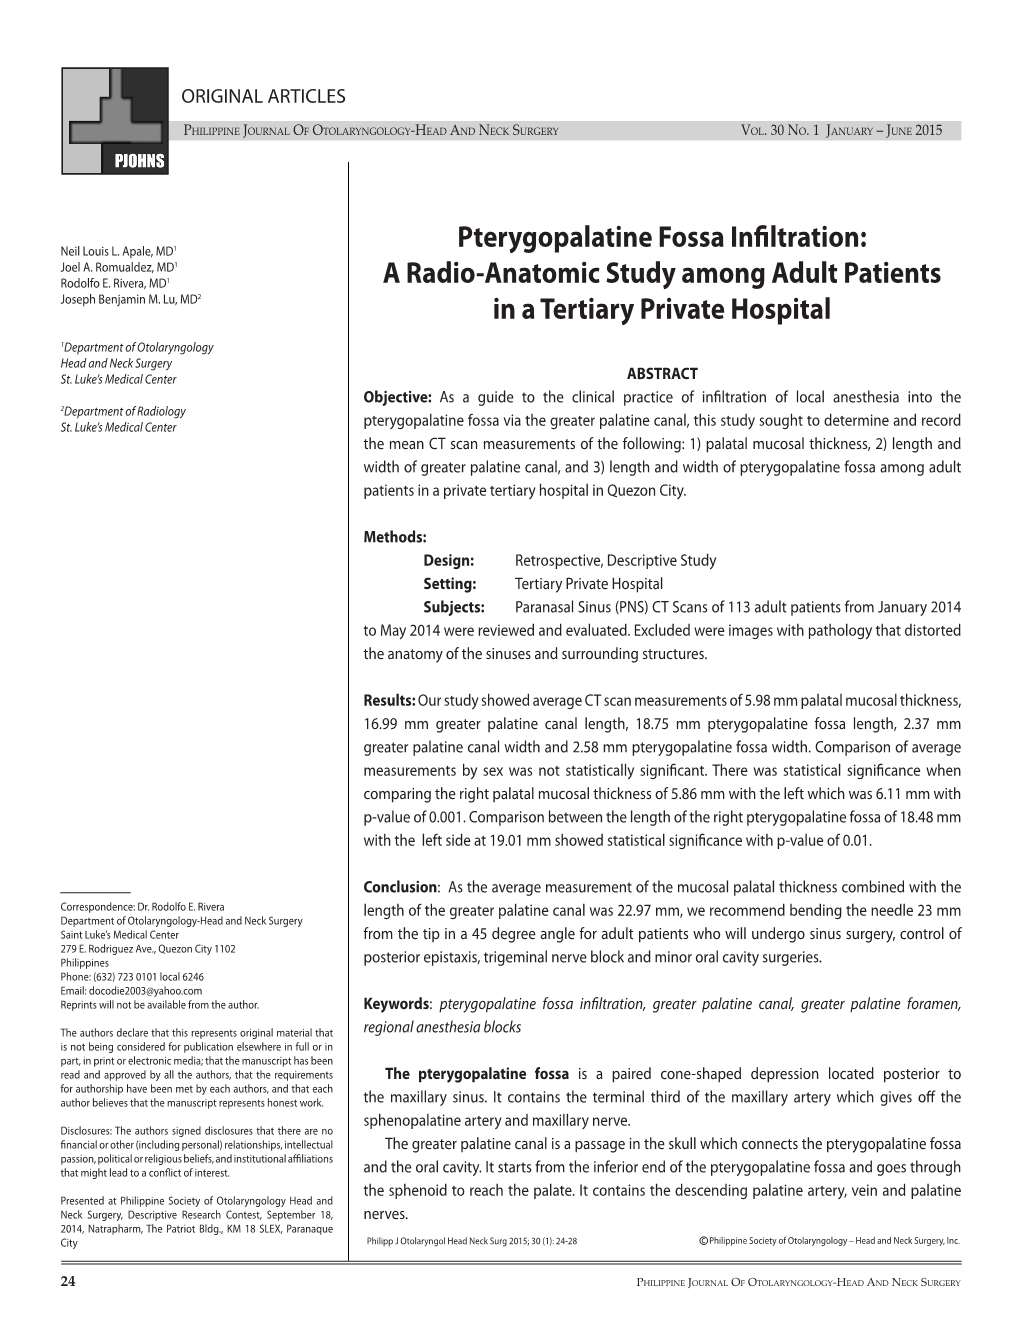 Pterygopalatine Fossa Infiltration: a Radio-Anatomic Study Among Adult Patients in a Tertiary Private Hospital